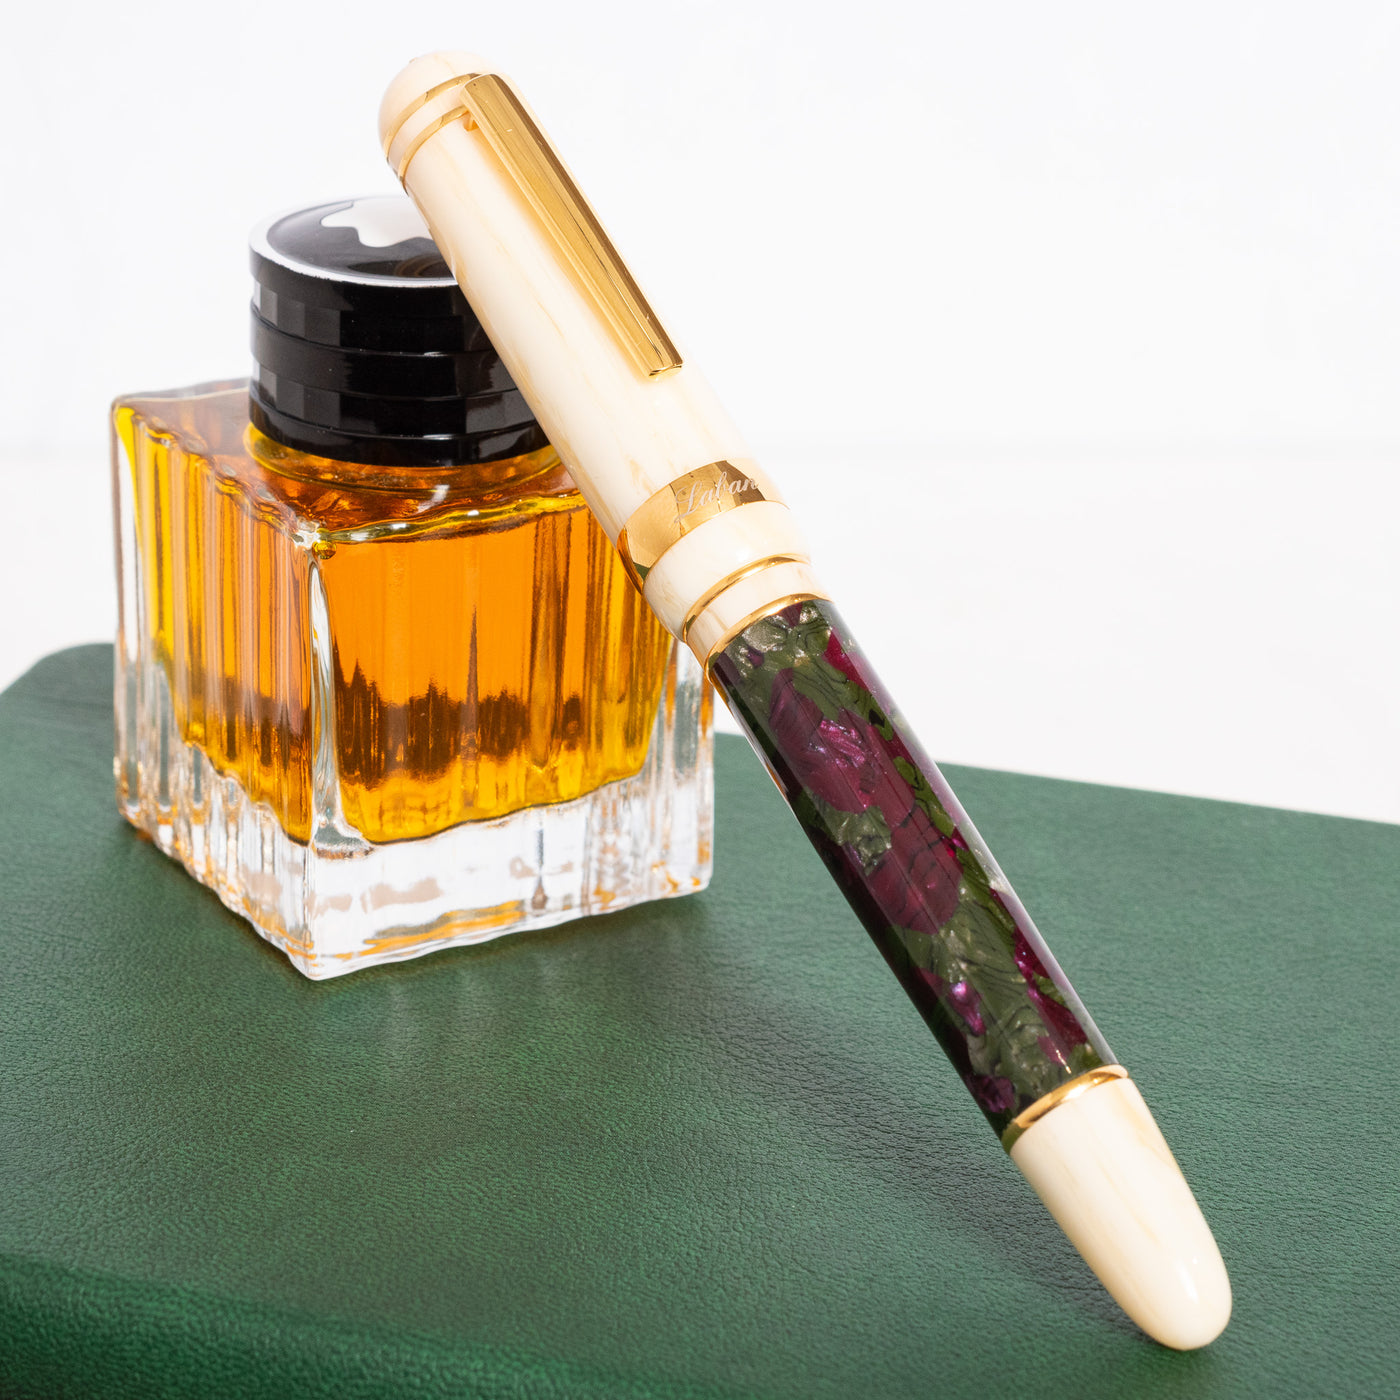 Laban 325 Fountain Pen - Damask capped